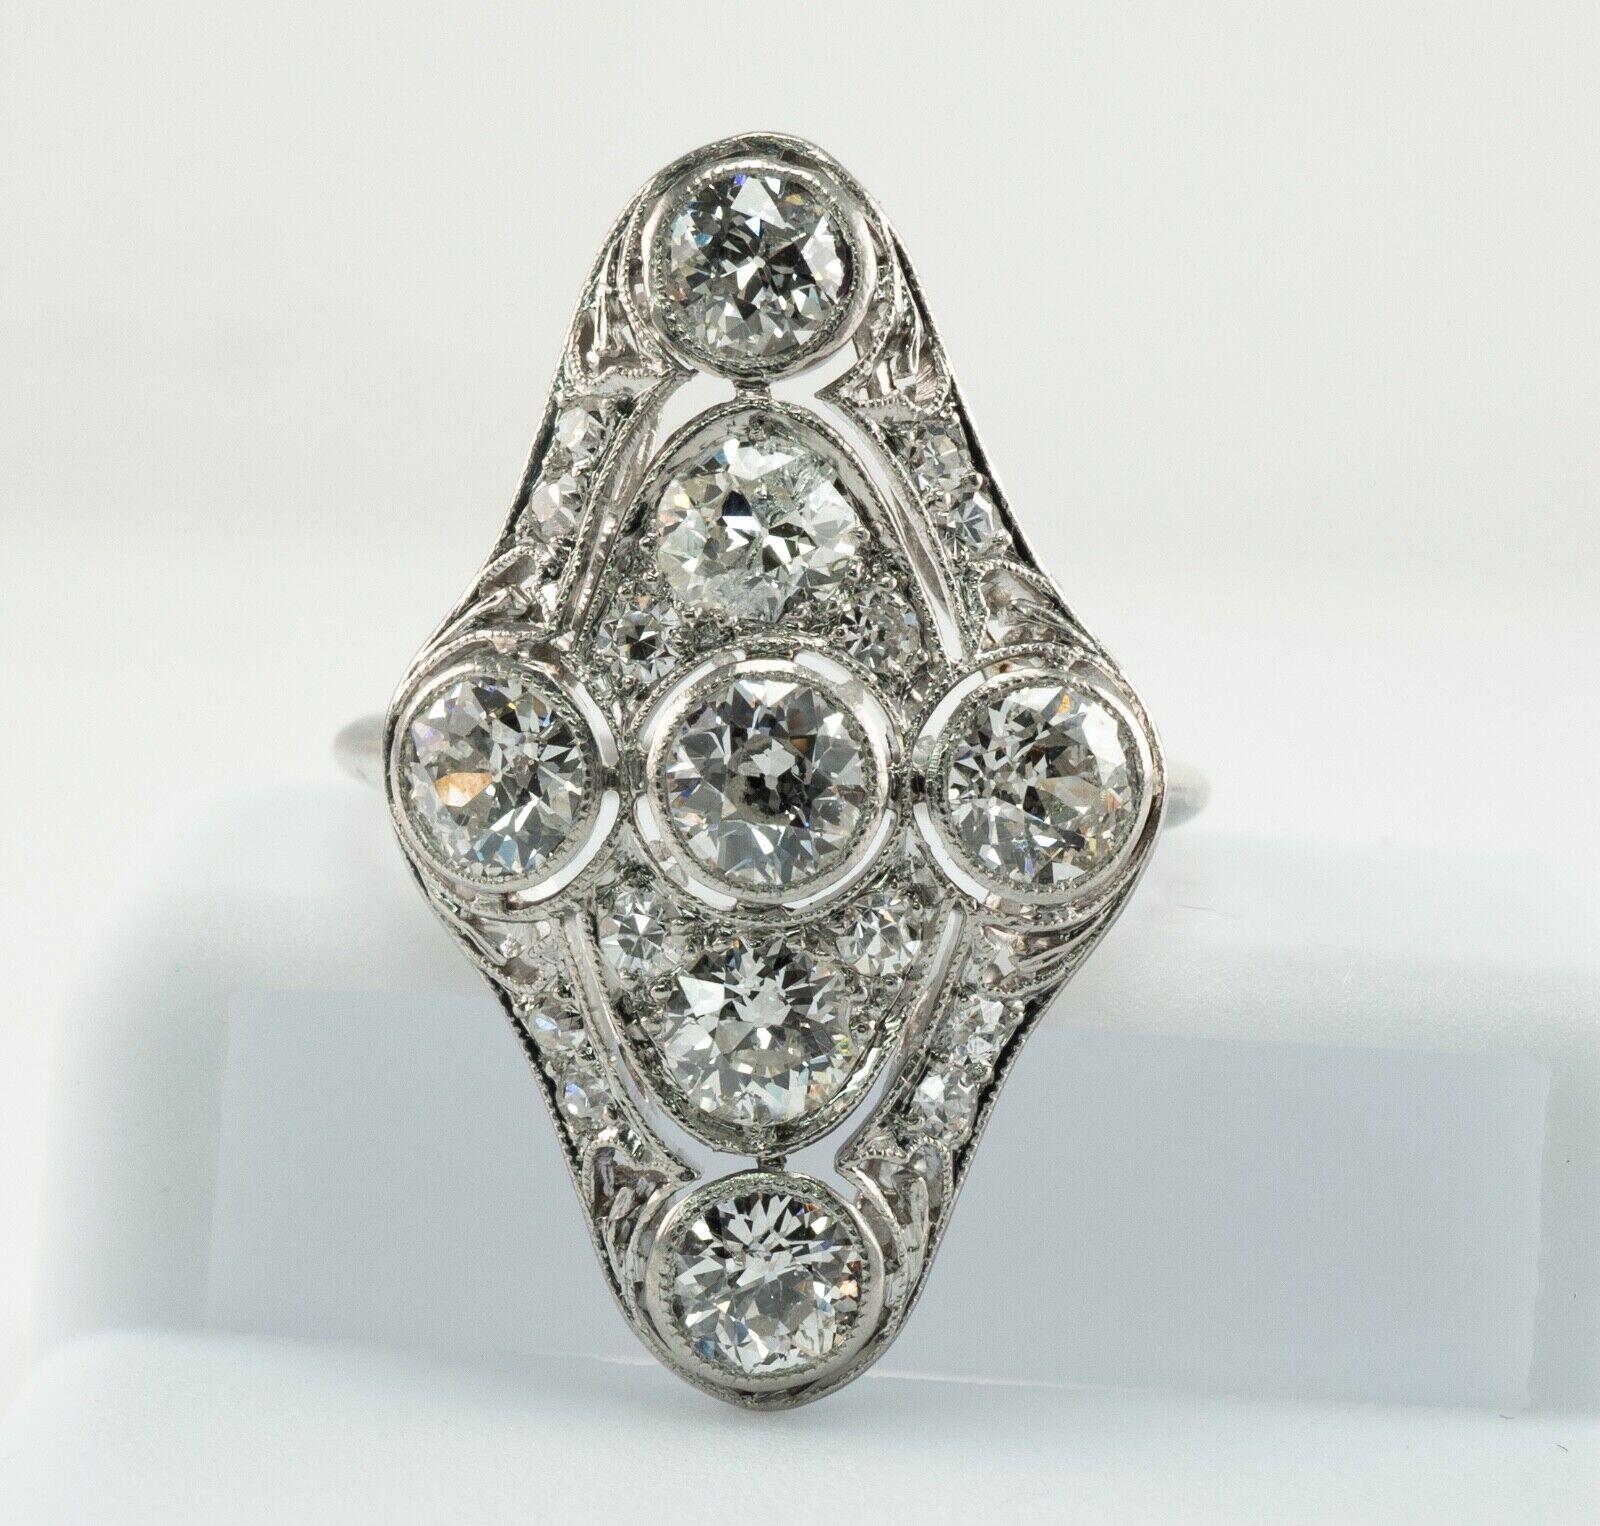 This gorgeous antique from Edwardian era ring is finely crafted in solid Platinum.
The ring is carefully tested and guaranteed. 
The ring is set with 19 natural old mine diamonds totaling 2.06 carats (.03ct - to .30 cts). 
All diamonds are original